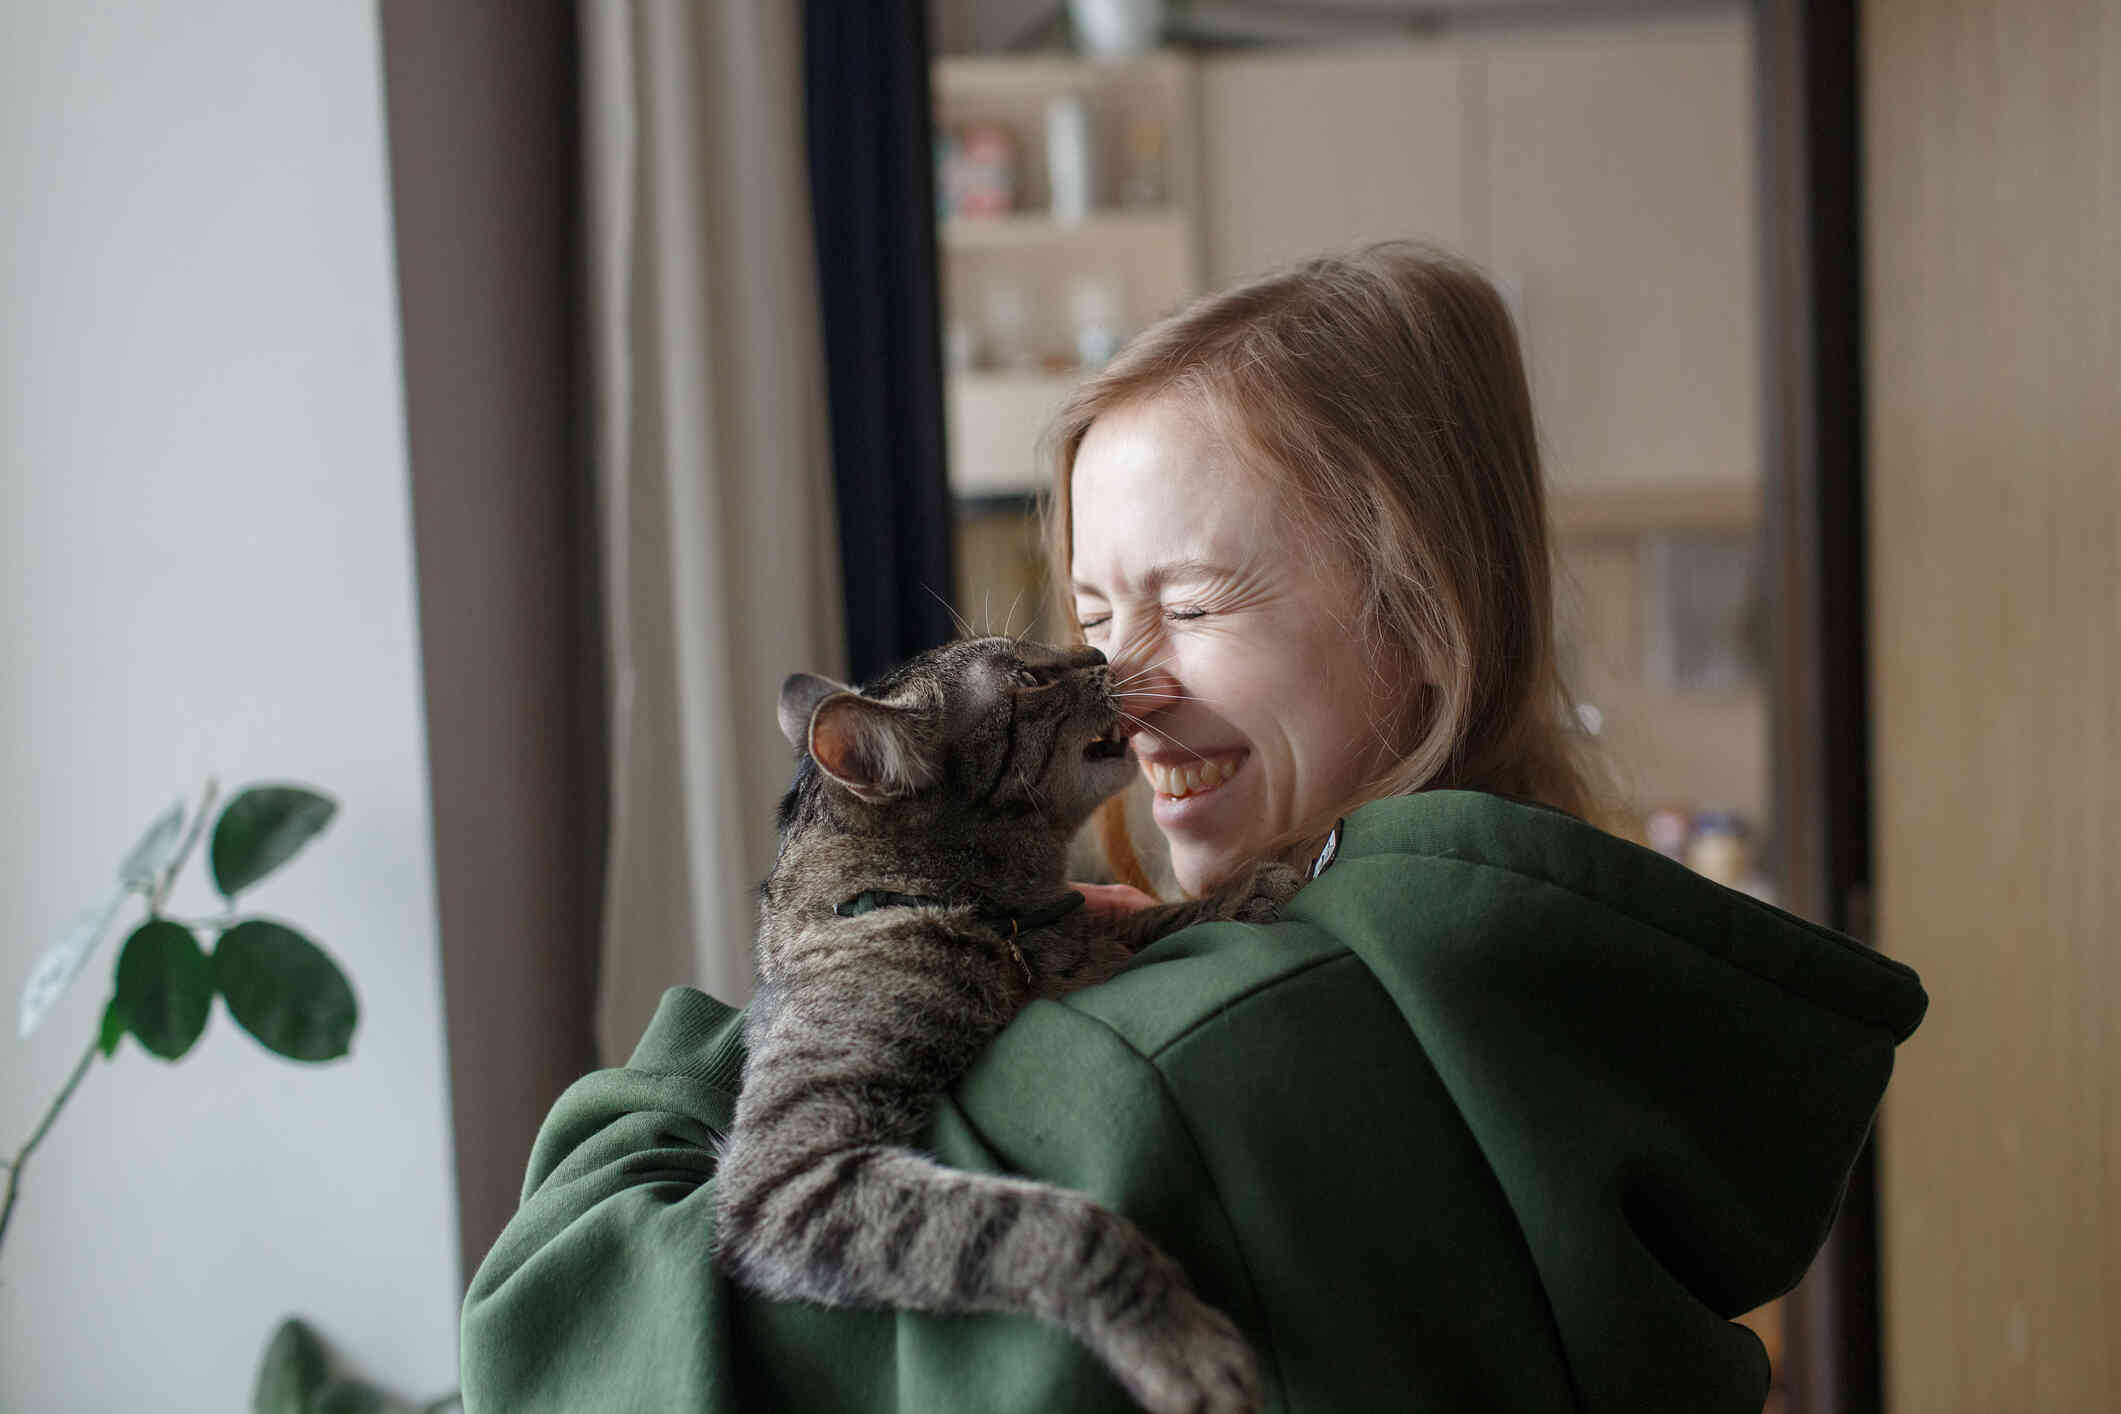 A close up of a woman in a green shirt holding her cat close to her face while smiling and the cat nibbles her nose.